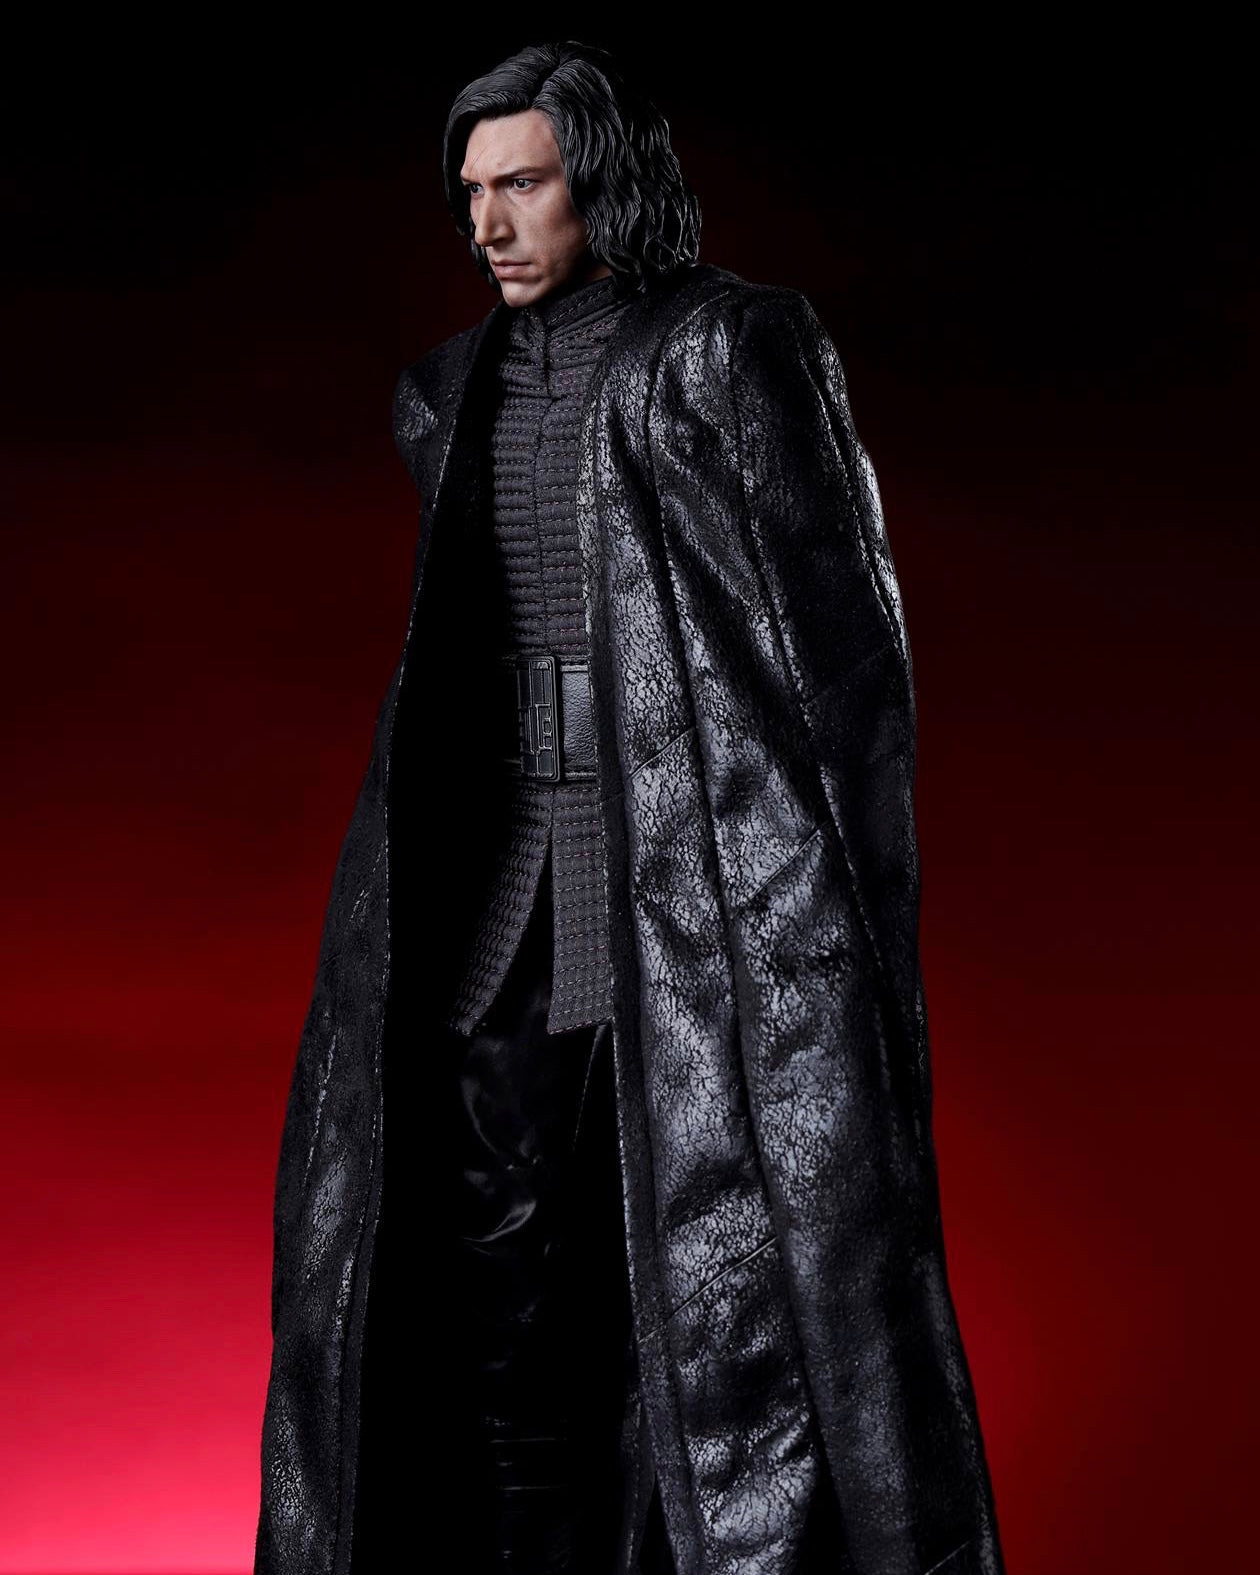 Hot toys Star Wars The Last Jedi Kylo Ren – Collectibles